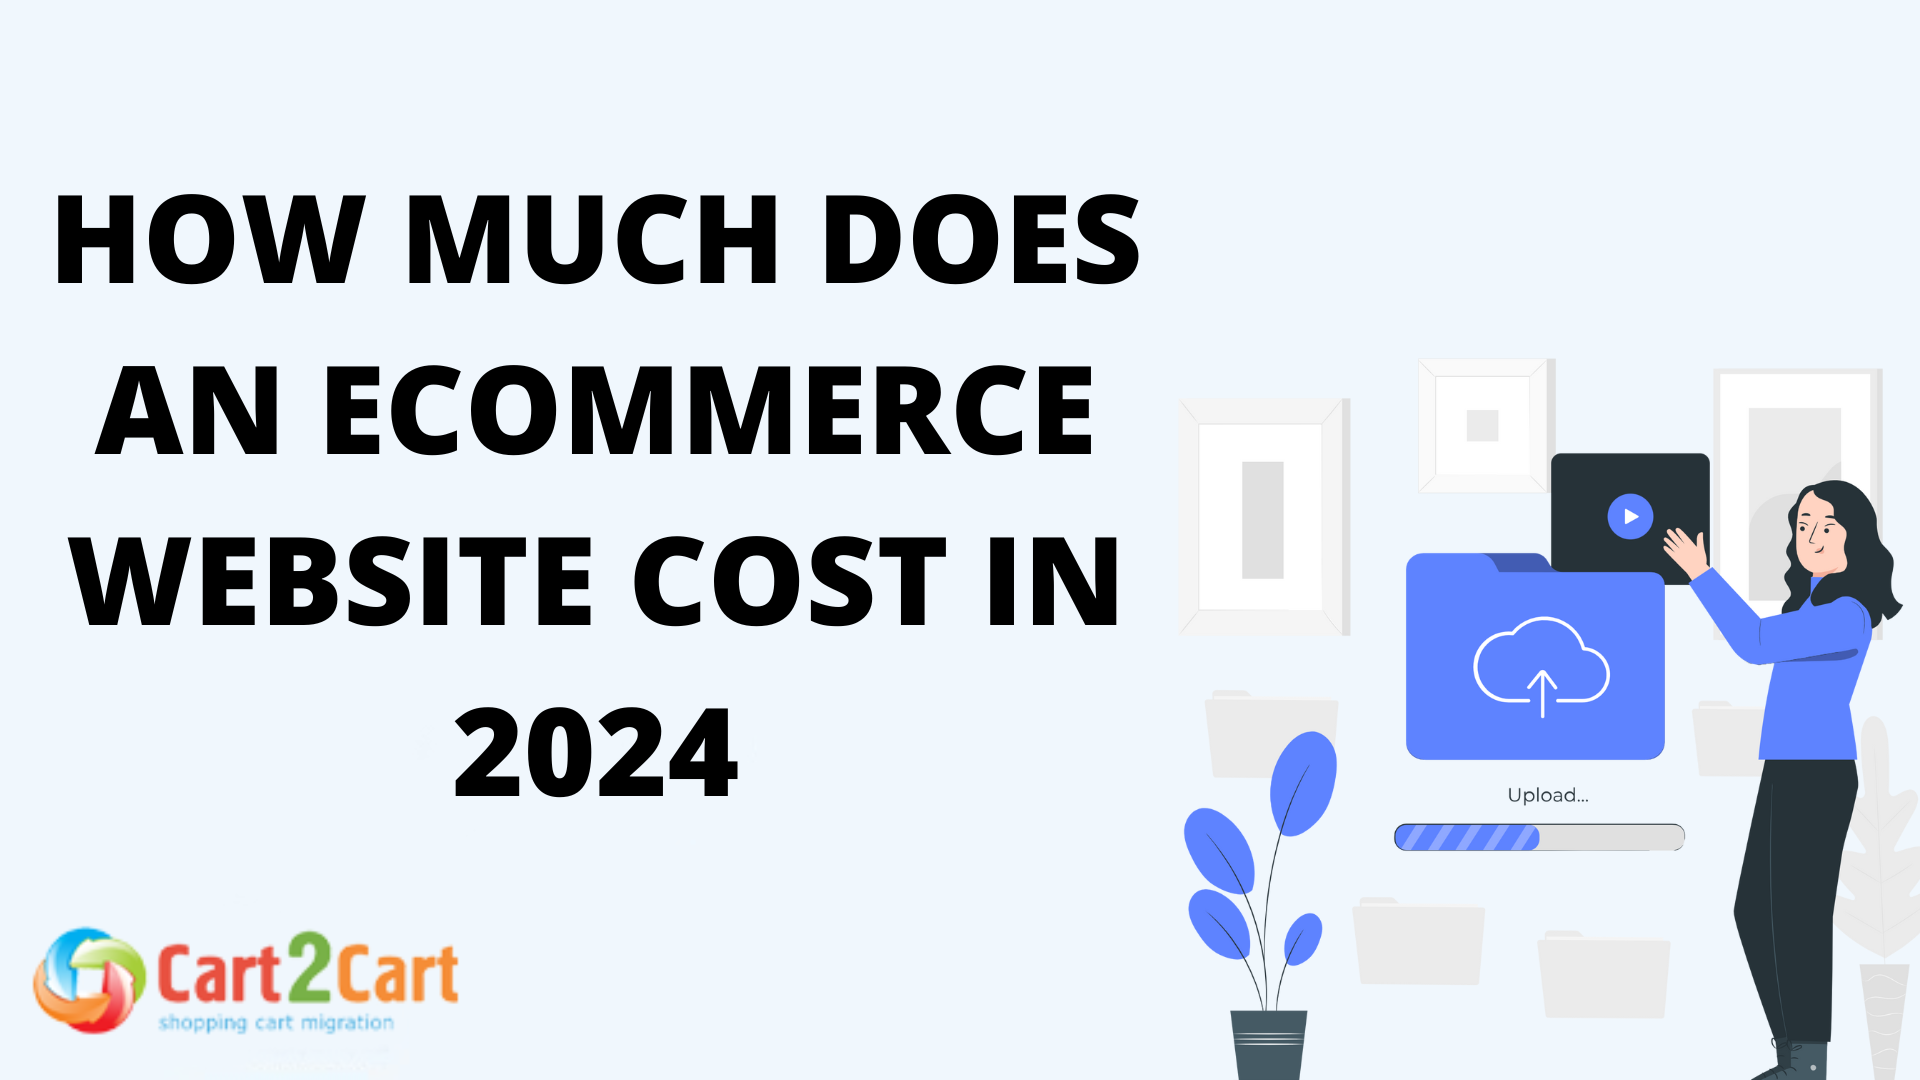 How Much Does an Ecommerce Website Cost in 2024